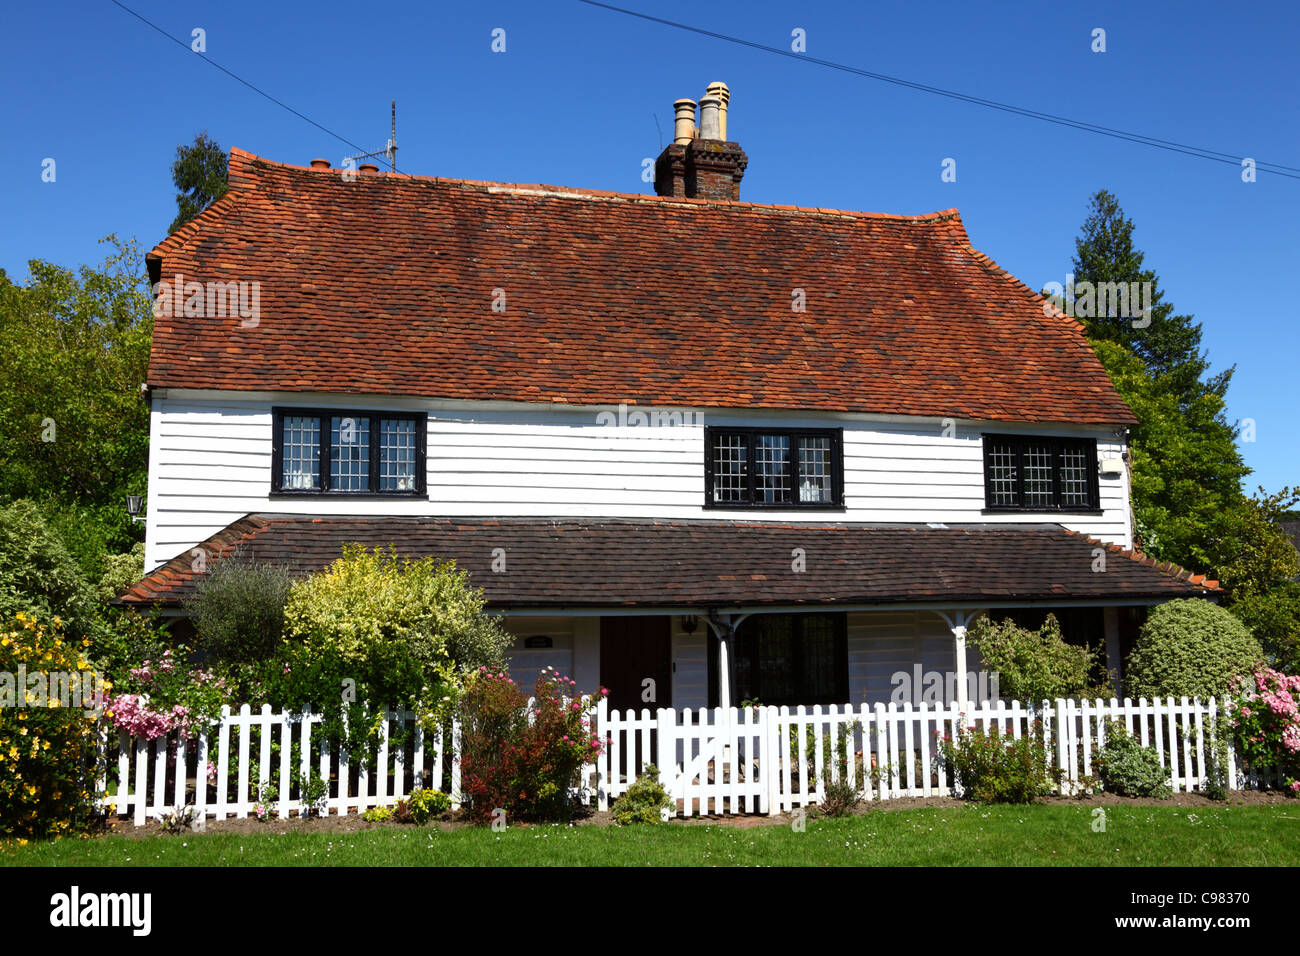 Stuart cottage, a 16th century Grade II listed traditional weatherboarded cottage, Southborough Common, near Tunbridge Wells, Kent, England Stock Photo